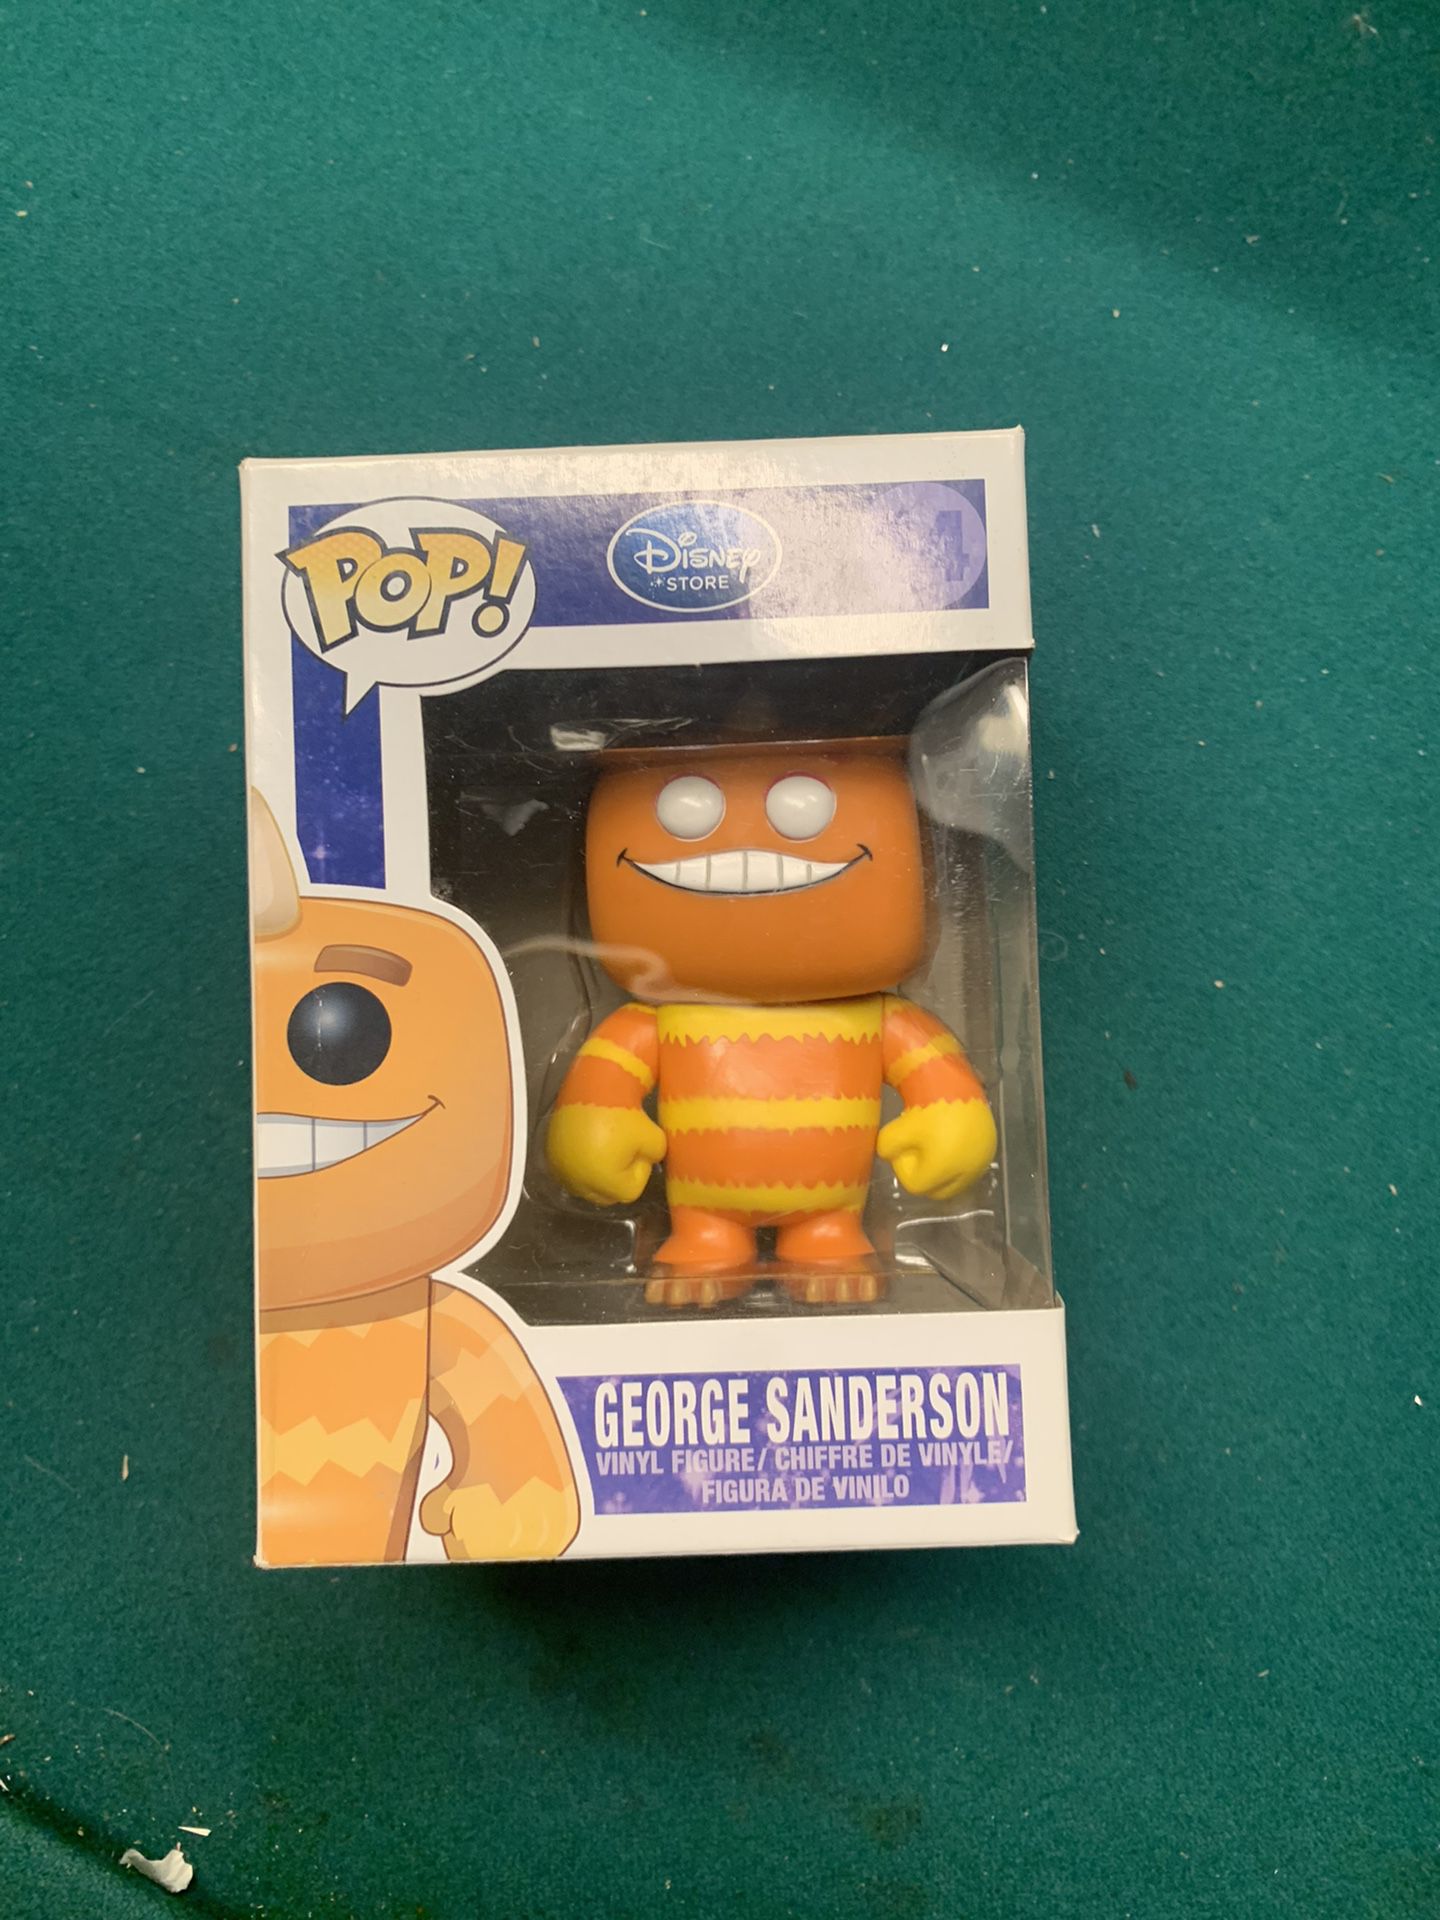 2011 RARE AND VAULTED Disney Monsters Inc George Sanderson Funko Pop with black eye rare box check pictures has some wear it’s over 10 year old pop